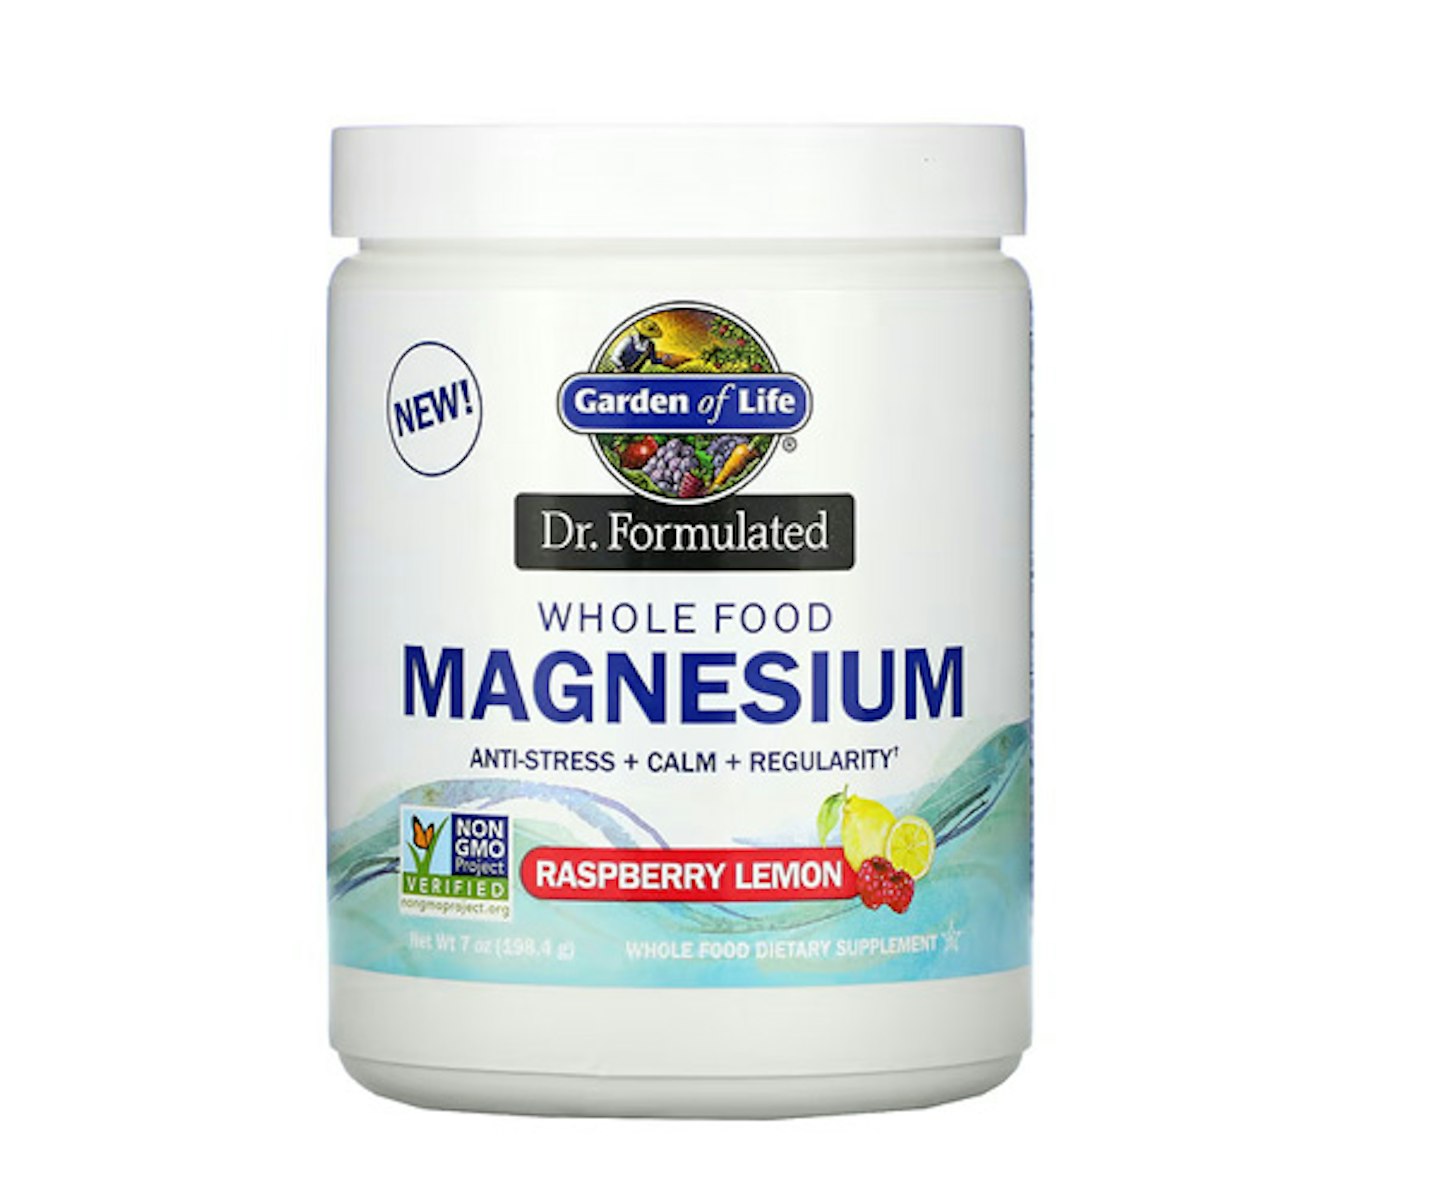 Garden of Life, Dr. Formulated, Whole Food Magnesium Powder